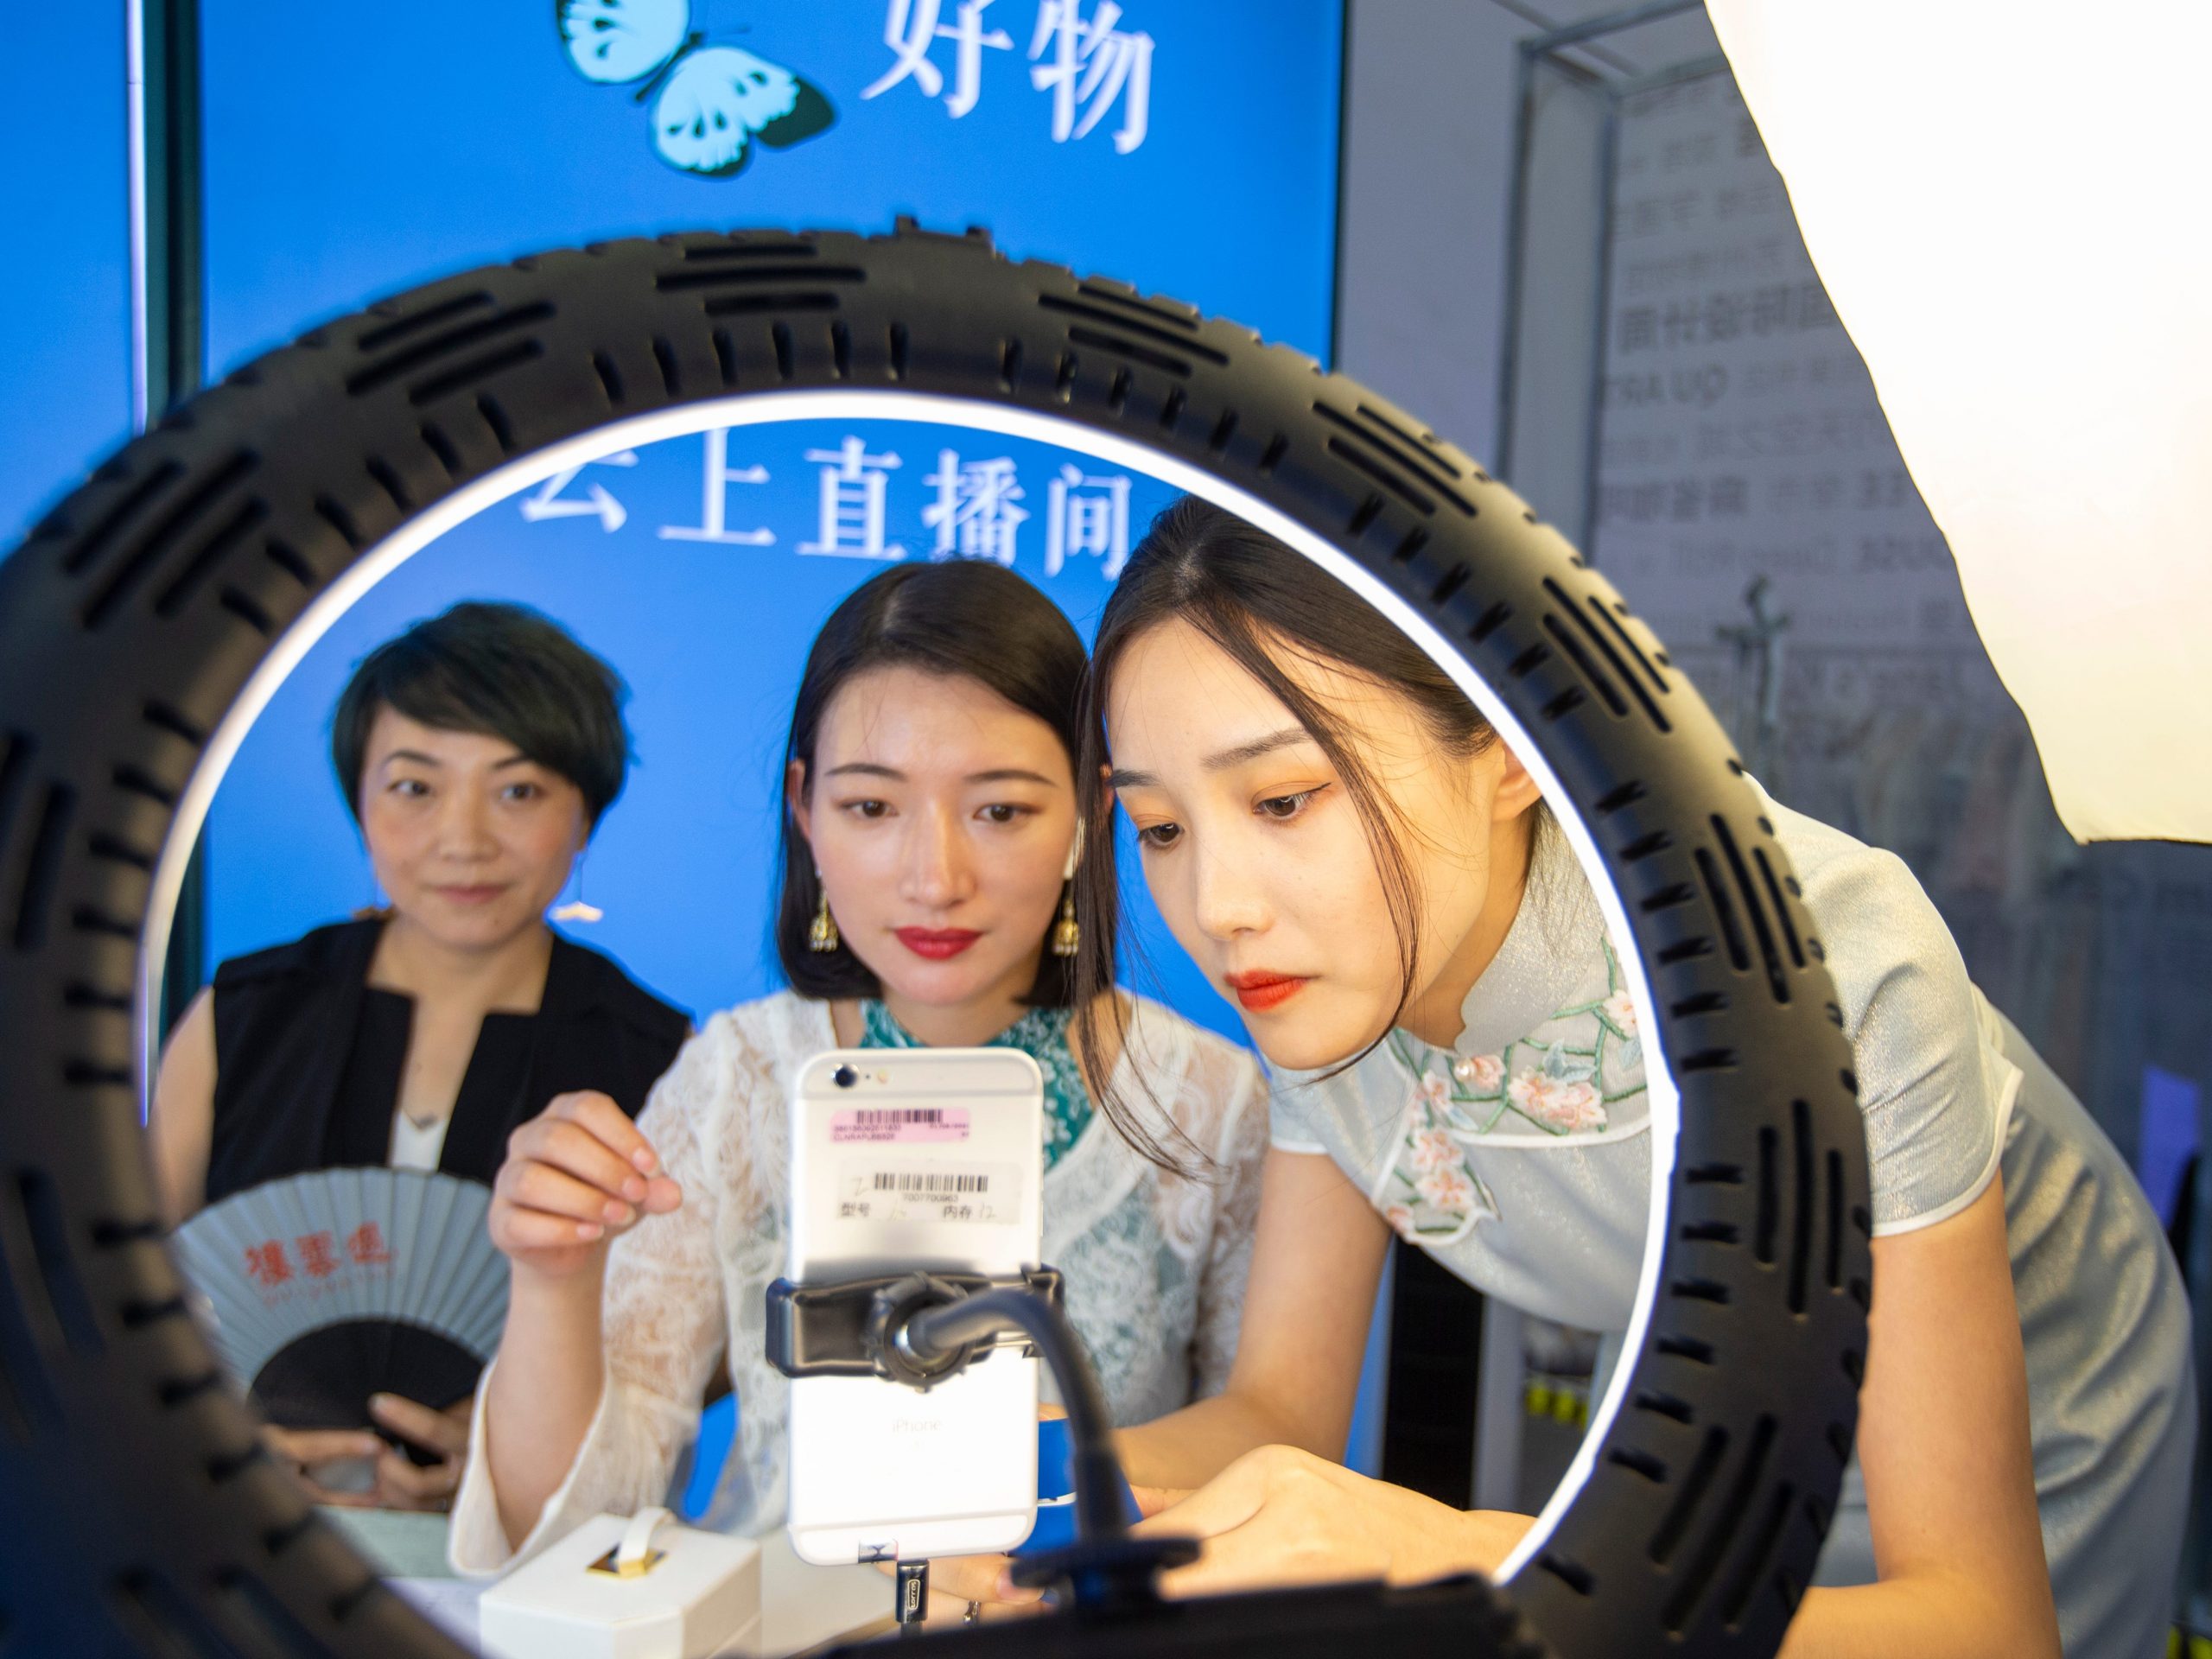 Exhibitors of Suzhou Innovation Fair live broadcast their cultural and creative products through Xiaohongshu and TikTok platforms. Suzhou City, Jiangsu Province, China, August 1, 2020.